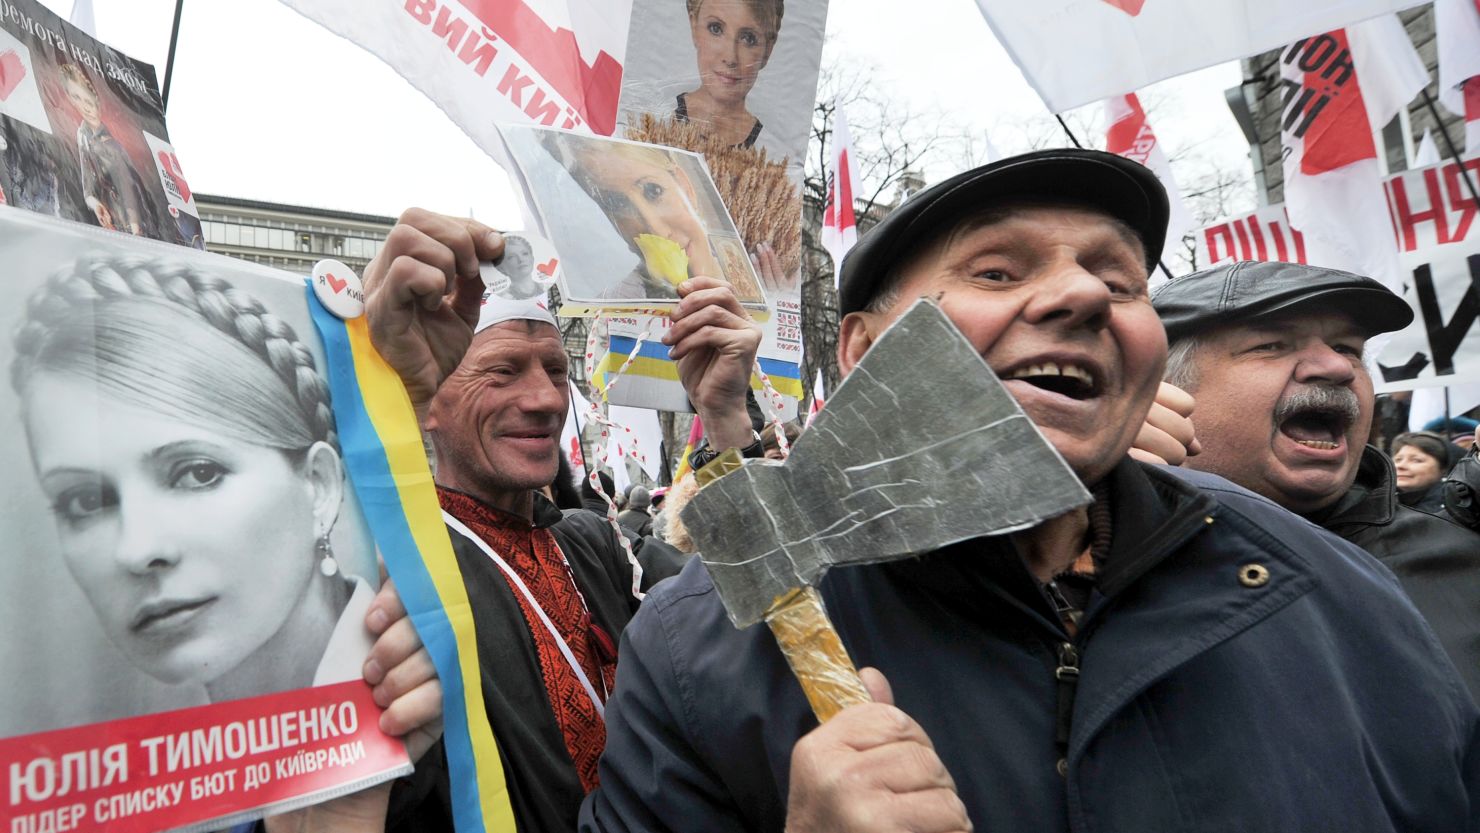 Demonstrators take to the streets of Kiev in March to call for the release of former Prime Minister Yulia Tymoshenko.